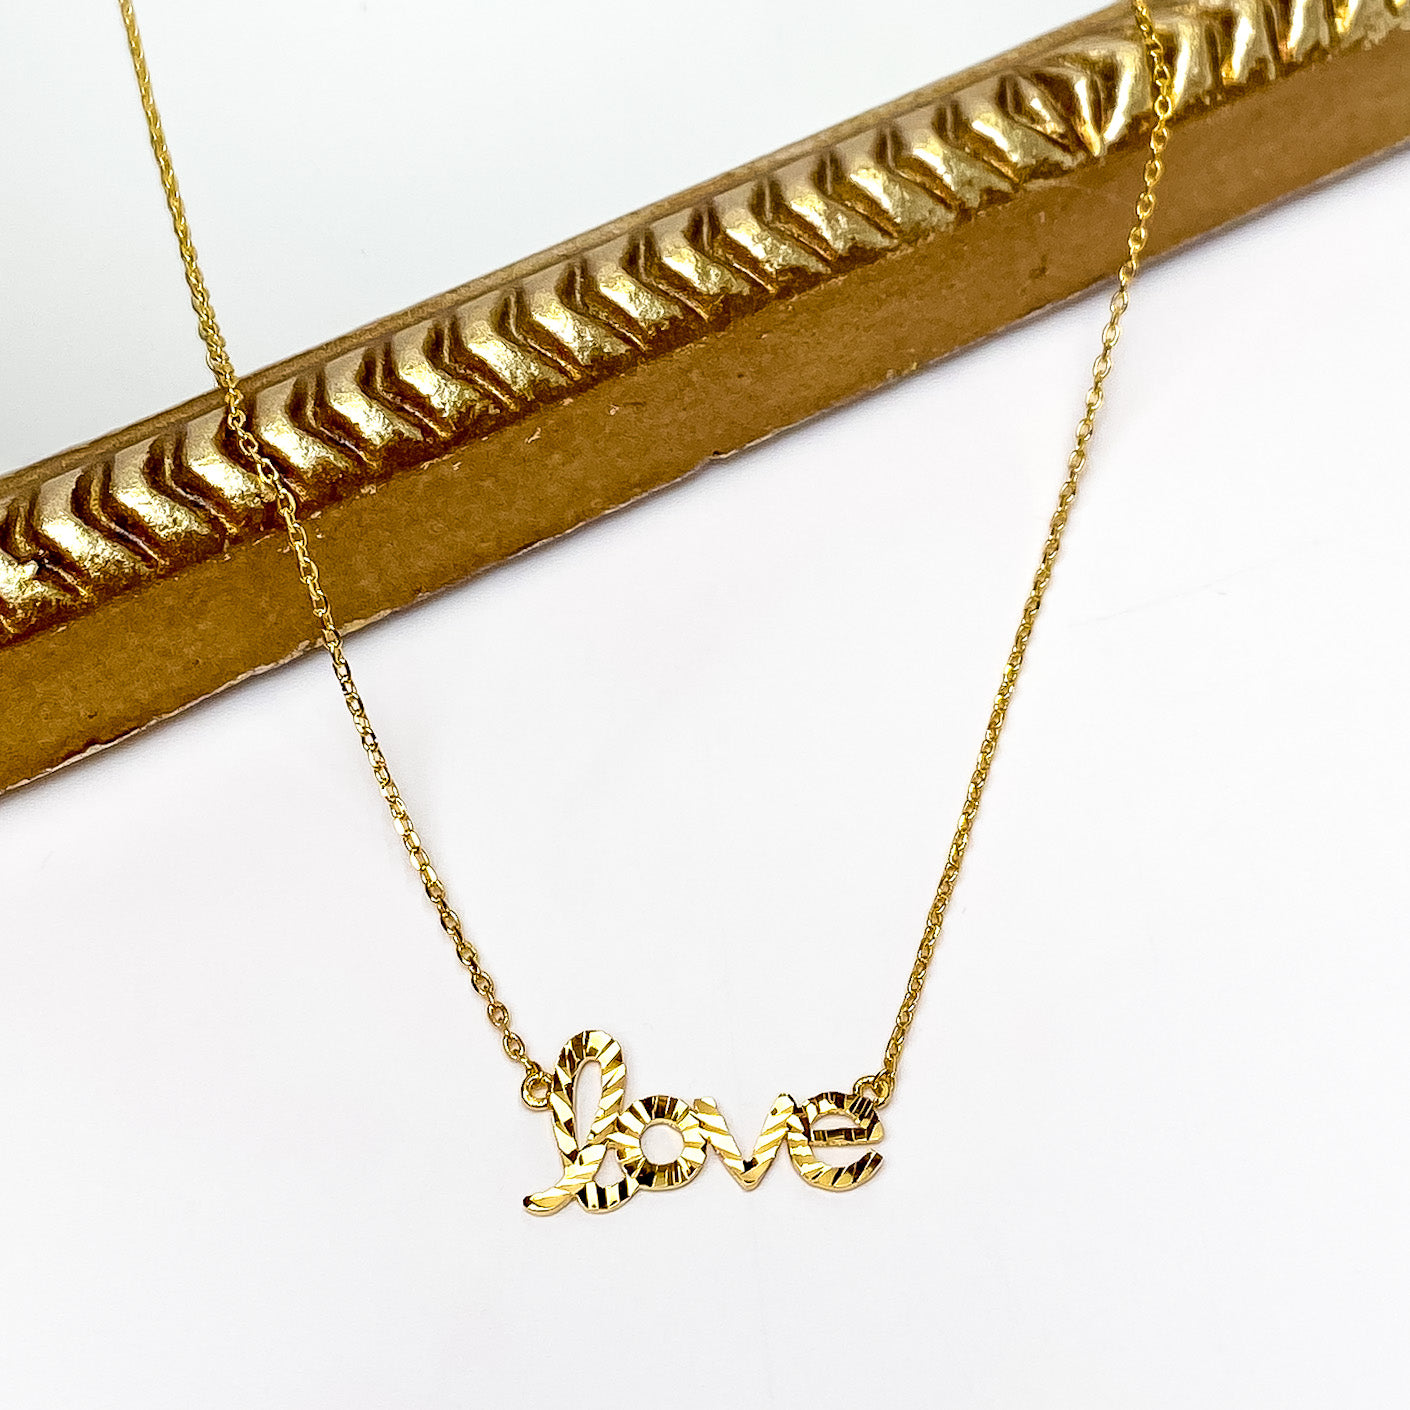 Gold chain necklace with a pedant that spells out "love". This necklace is pictured partially laying on a gold mirror on a white background. 